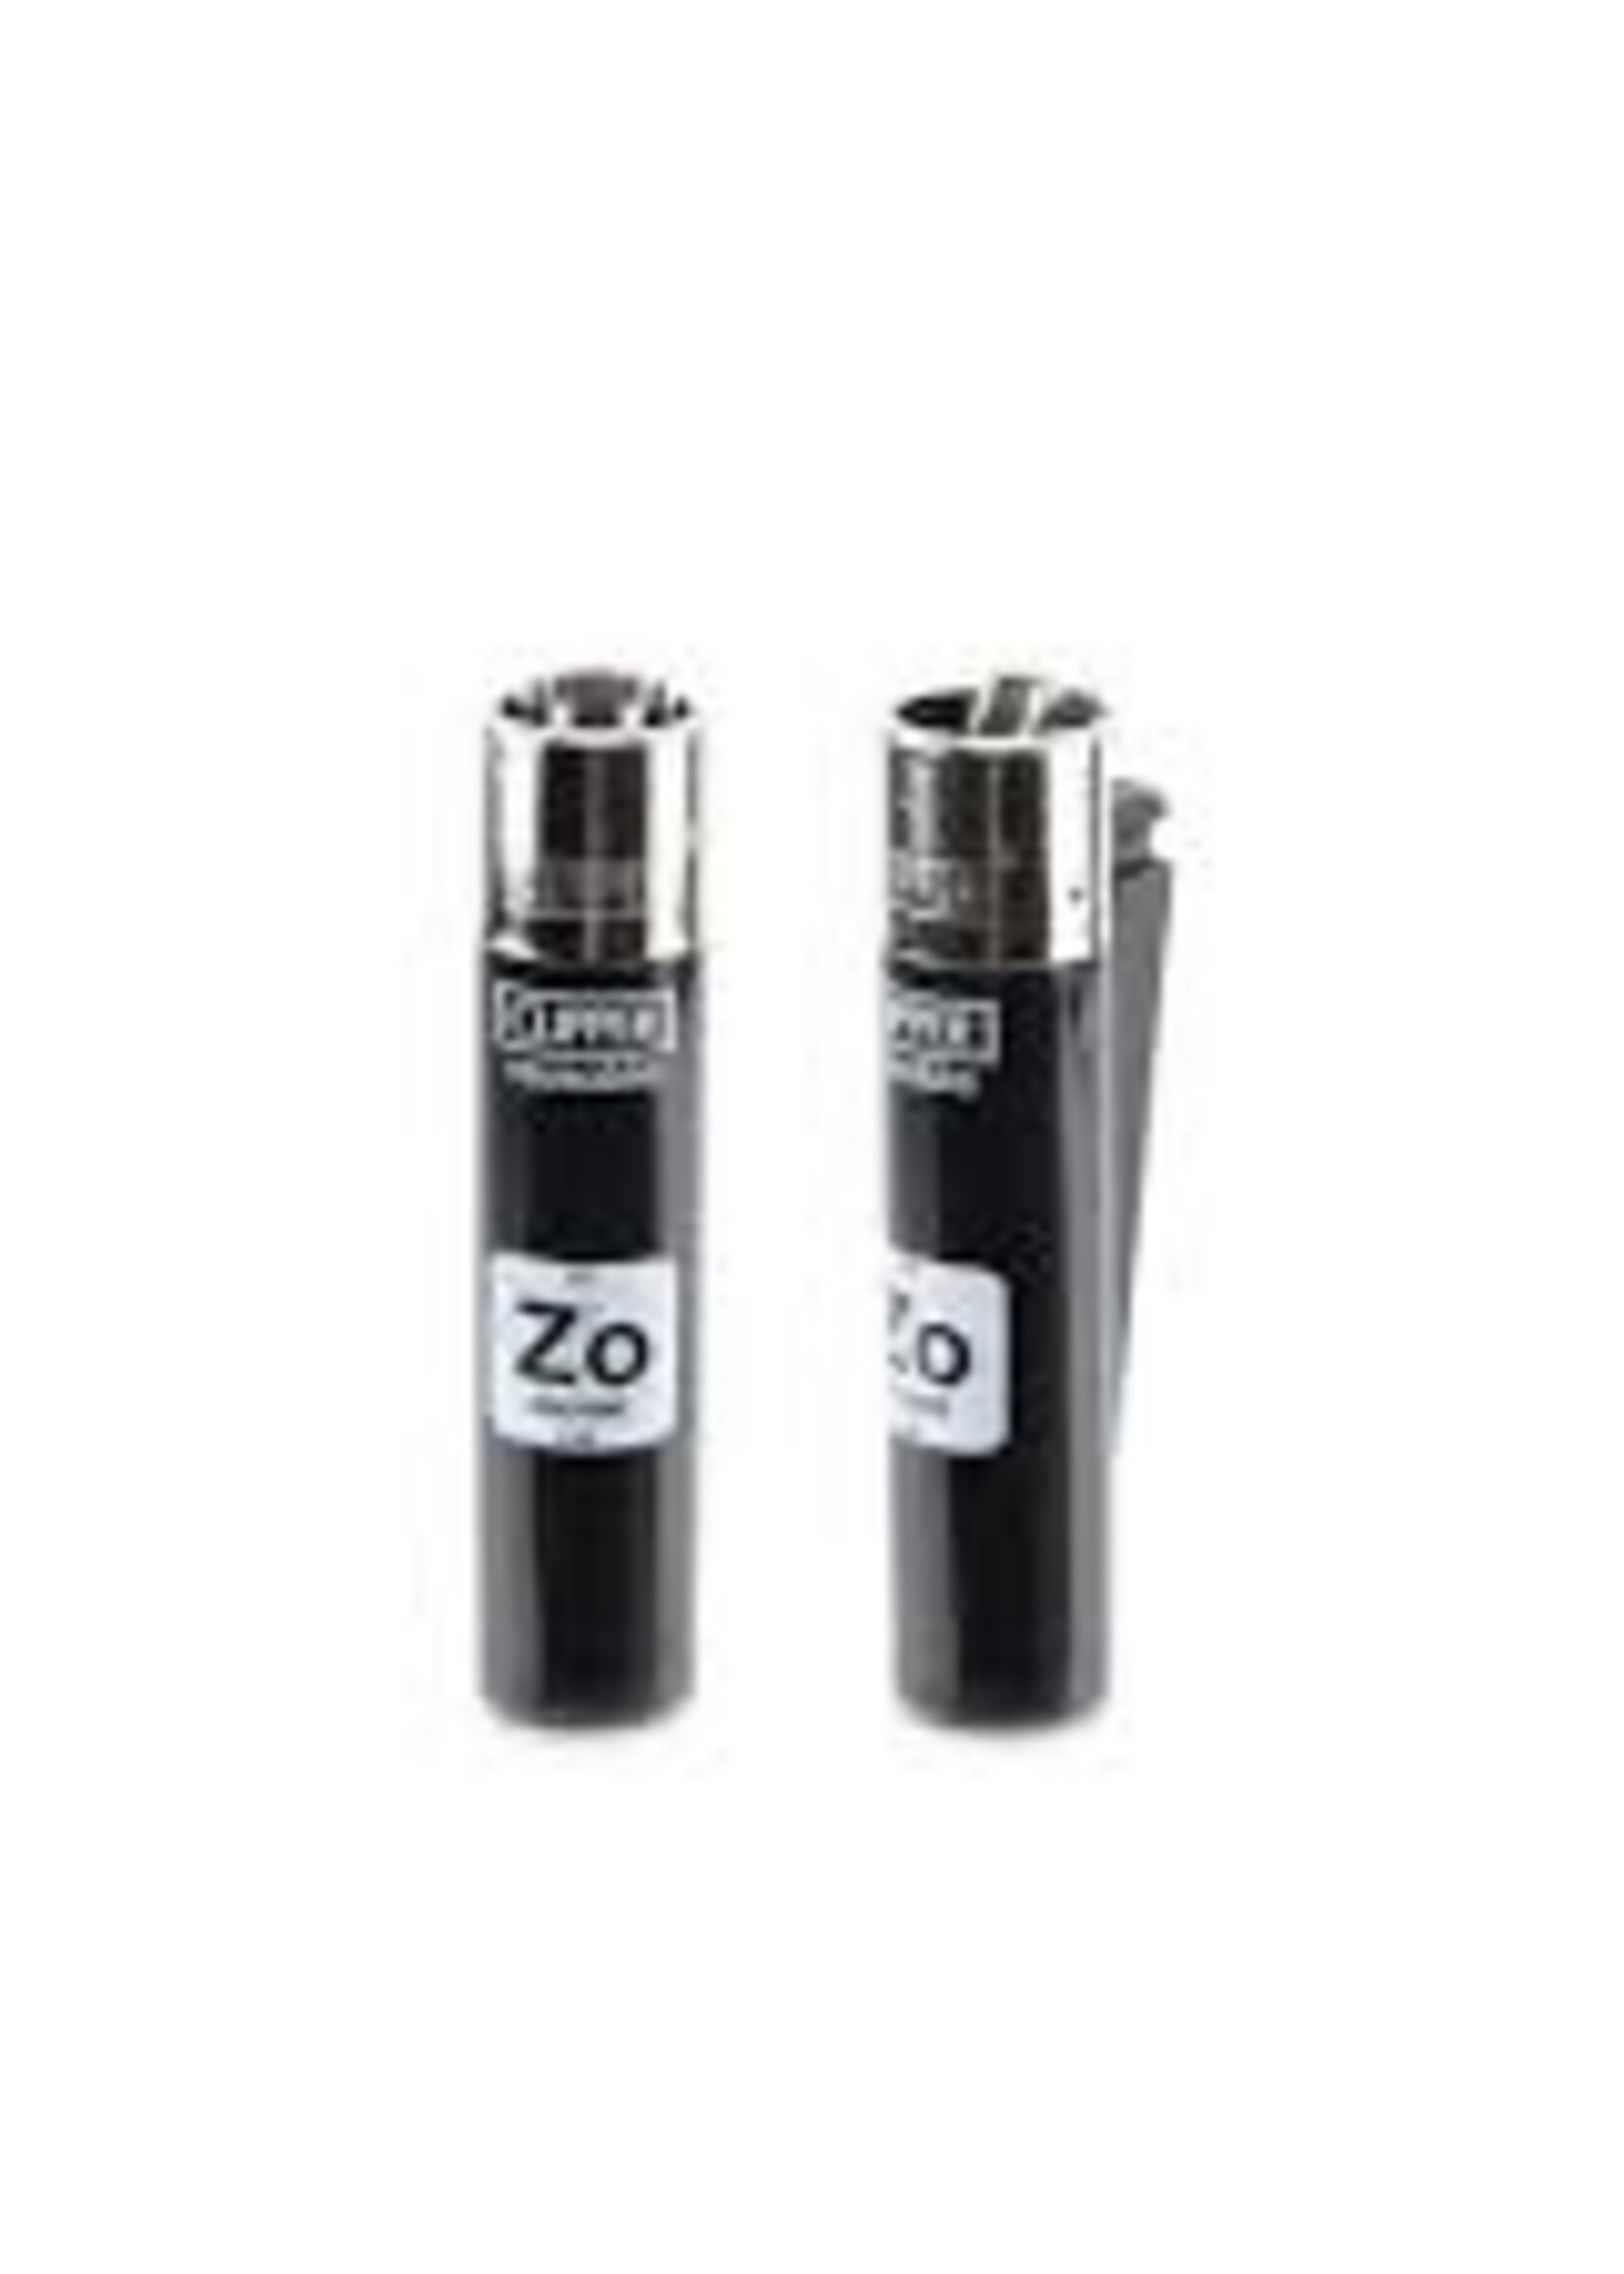 Clipper Clipper Lighter - Zooted